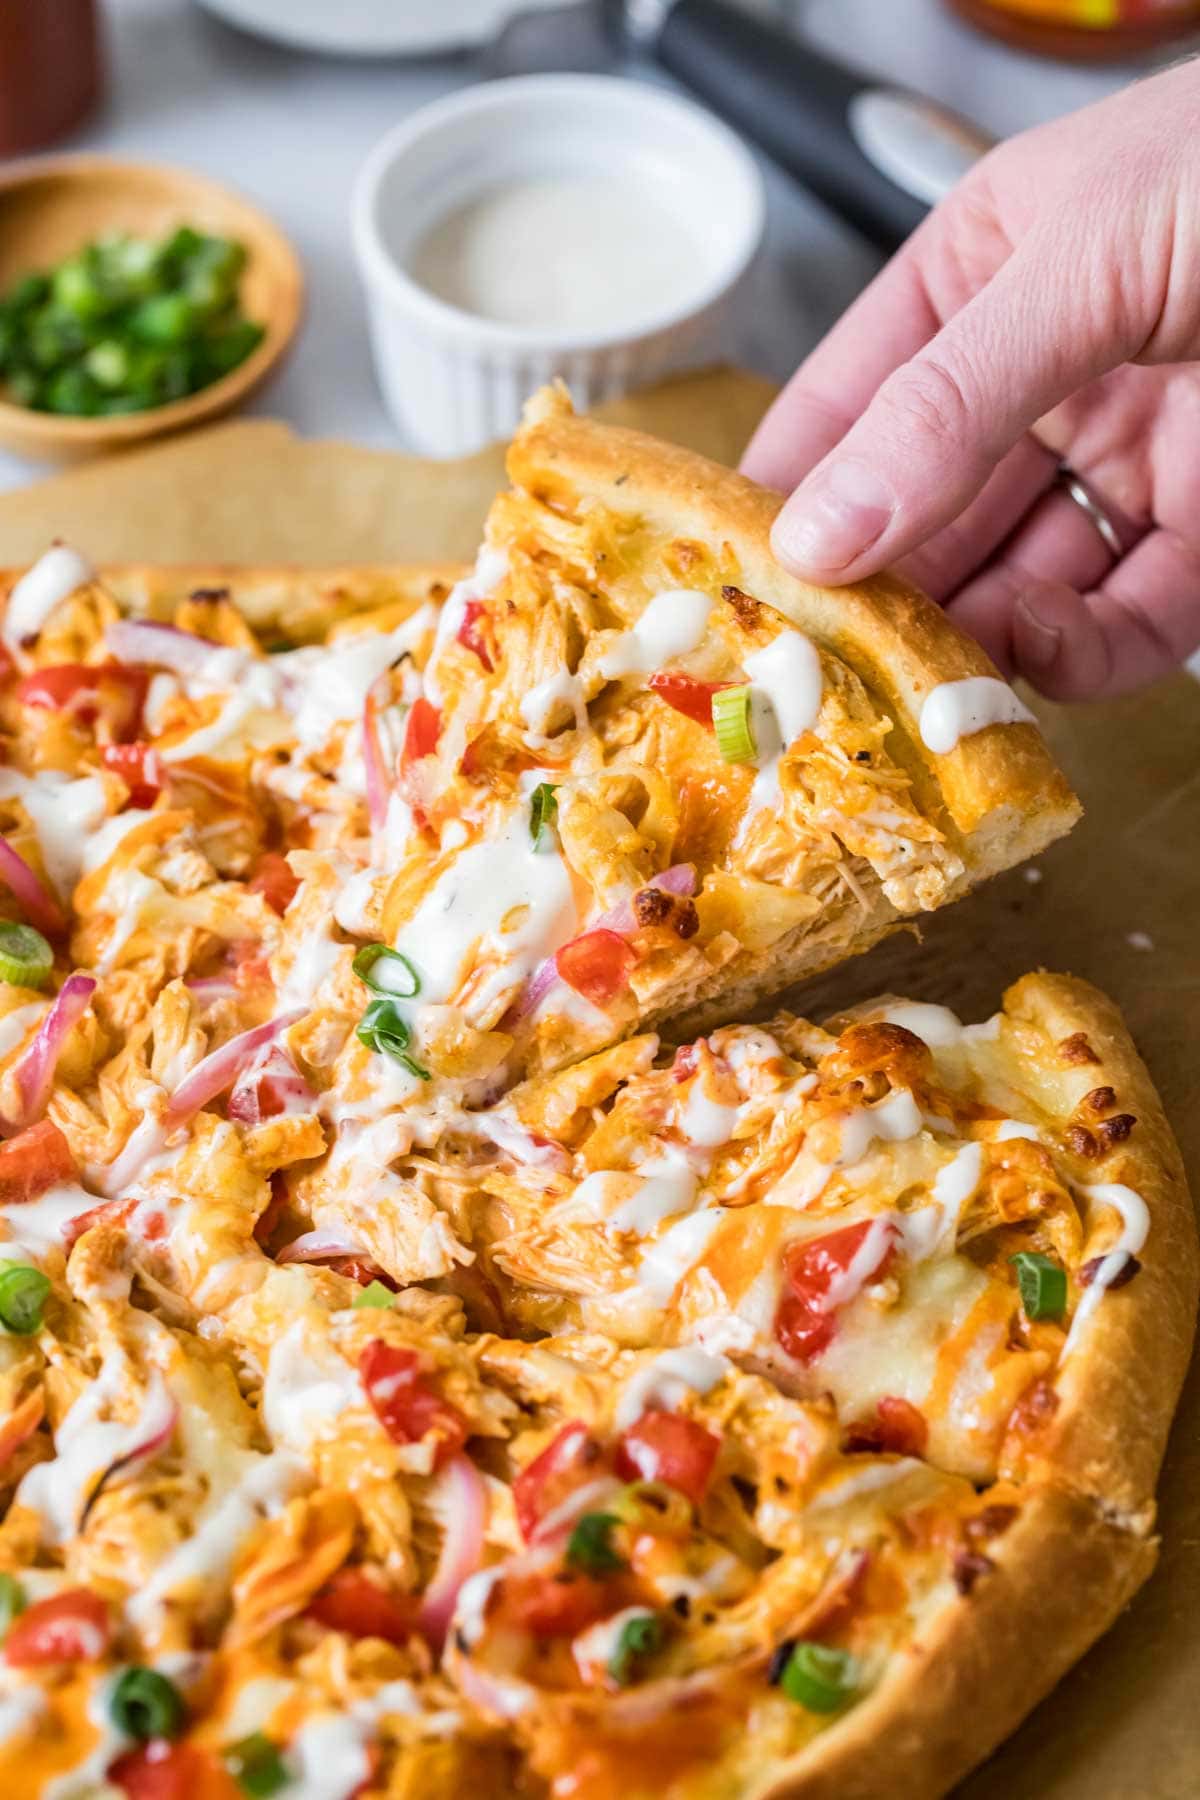 Slice being pulled from a pizza made with buffalo chicken.